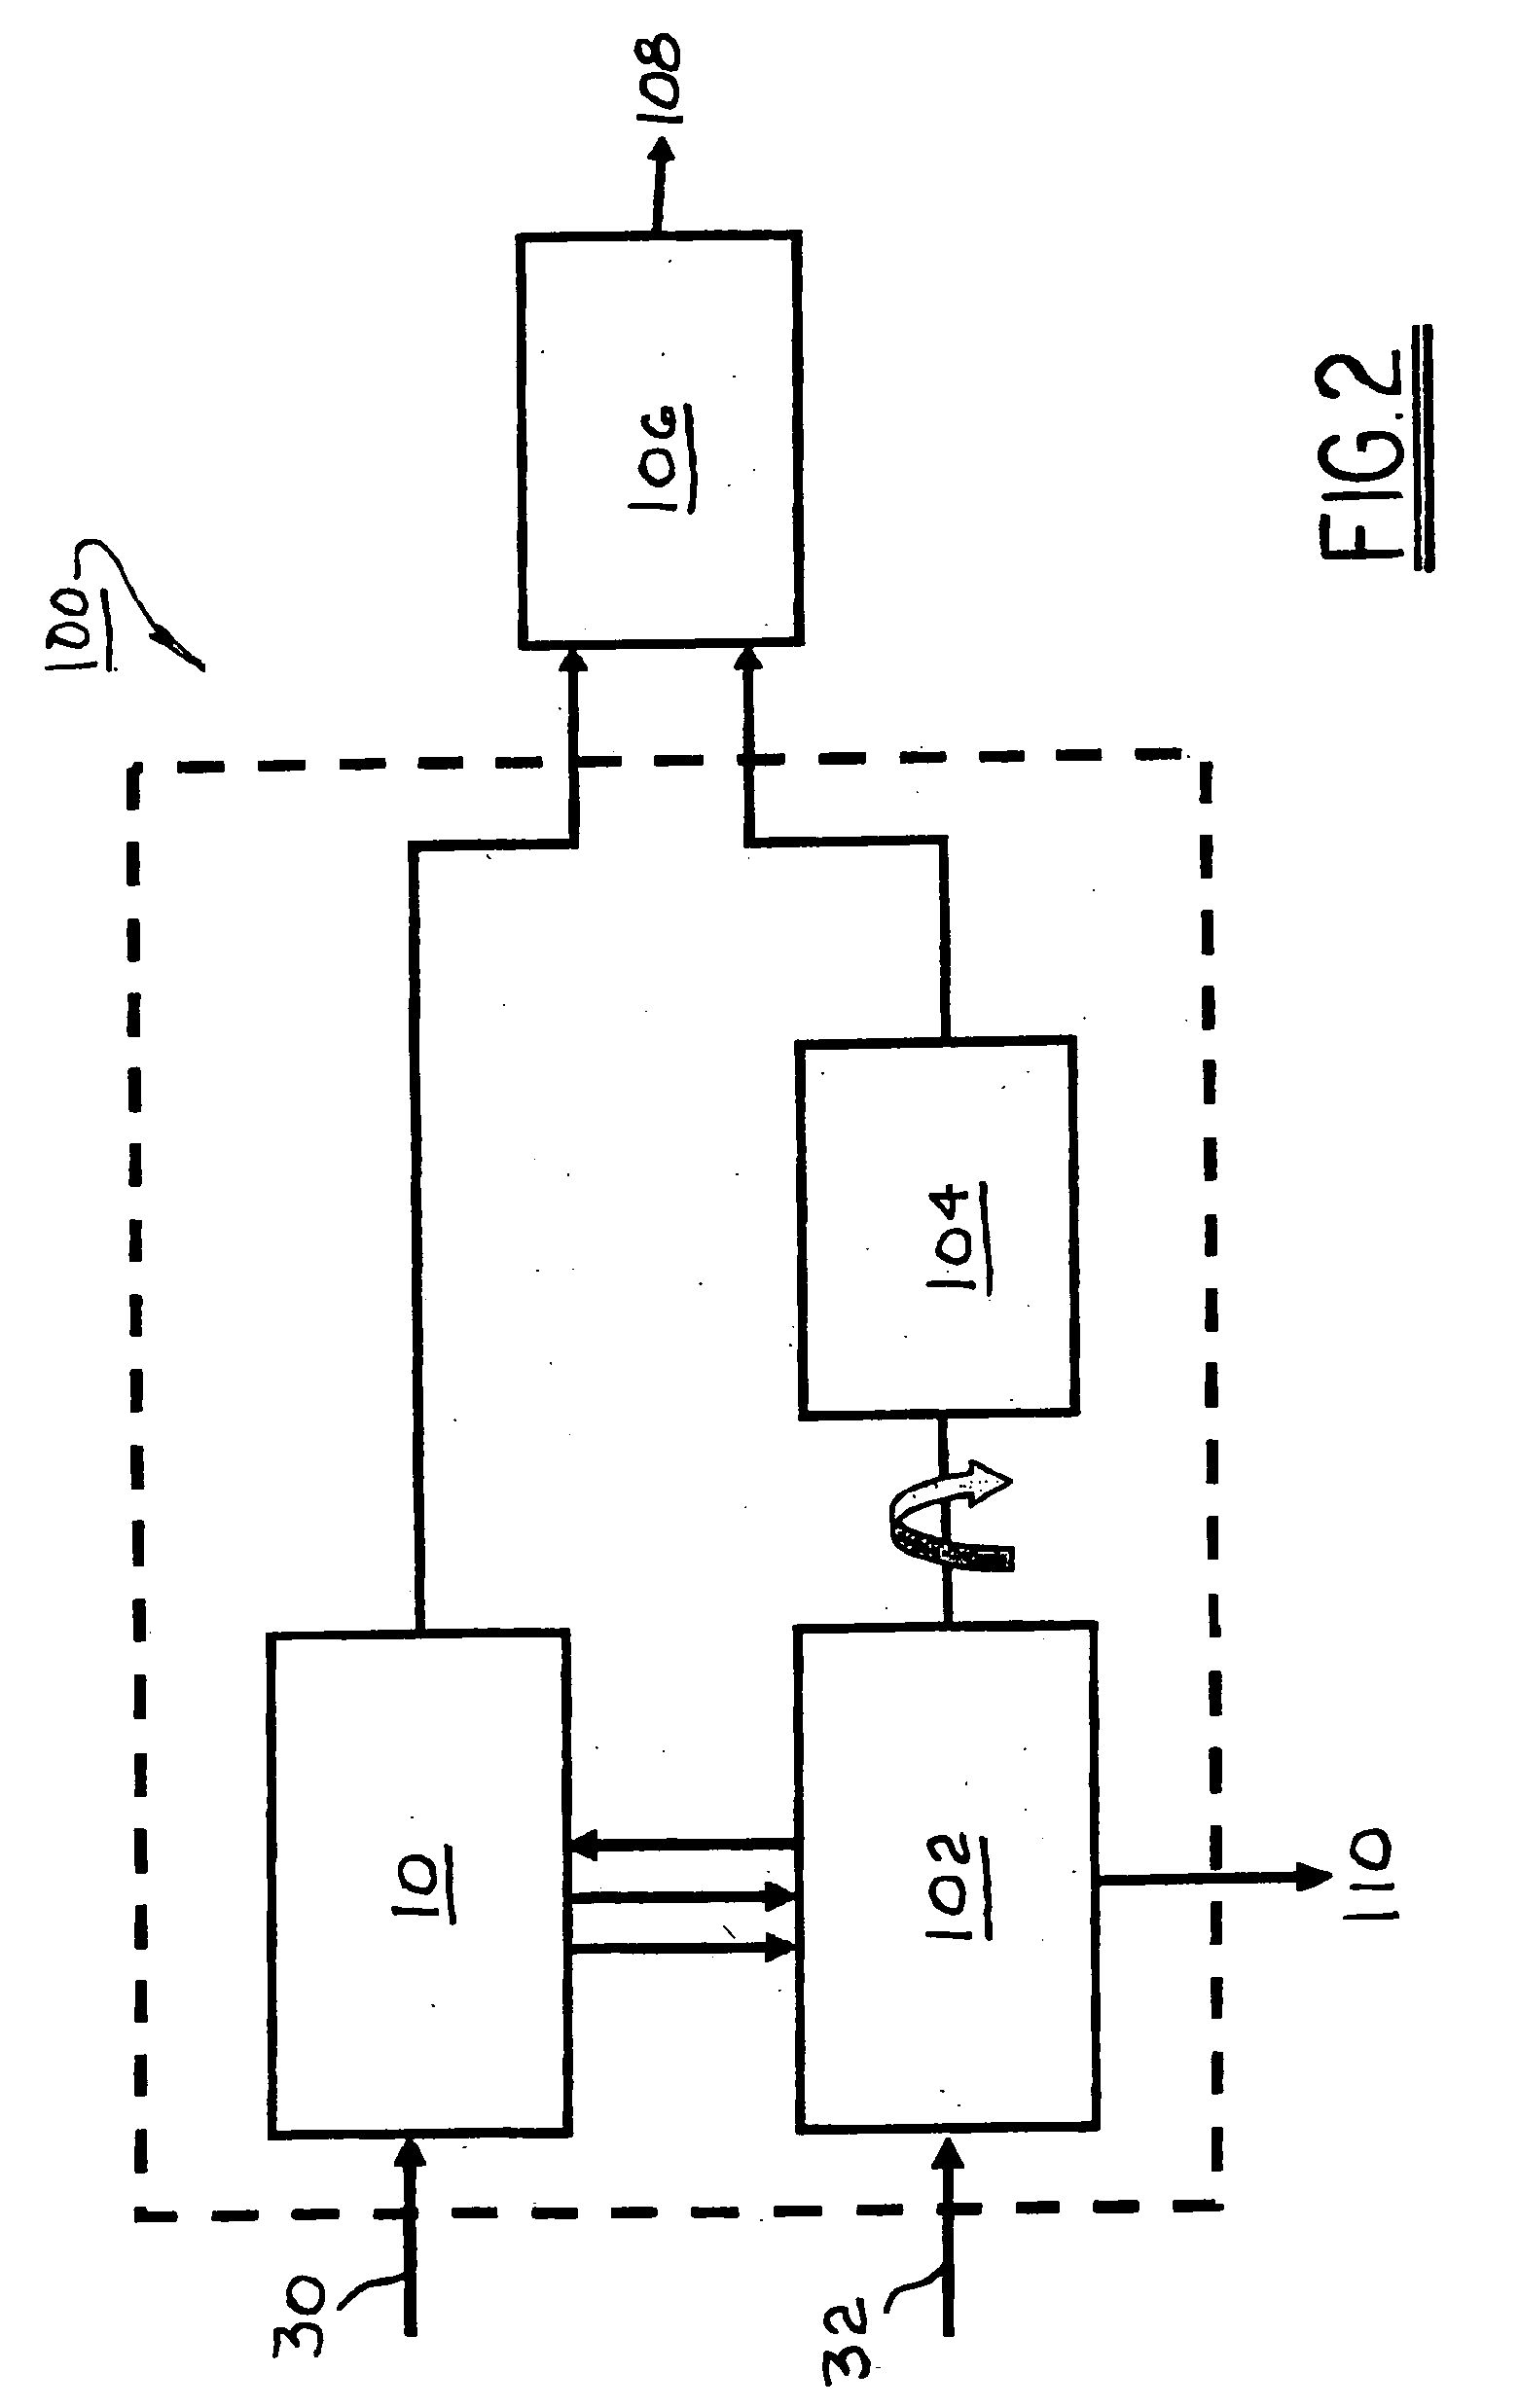 Hybrid power generating system combining a fuel cell and a gas turbine